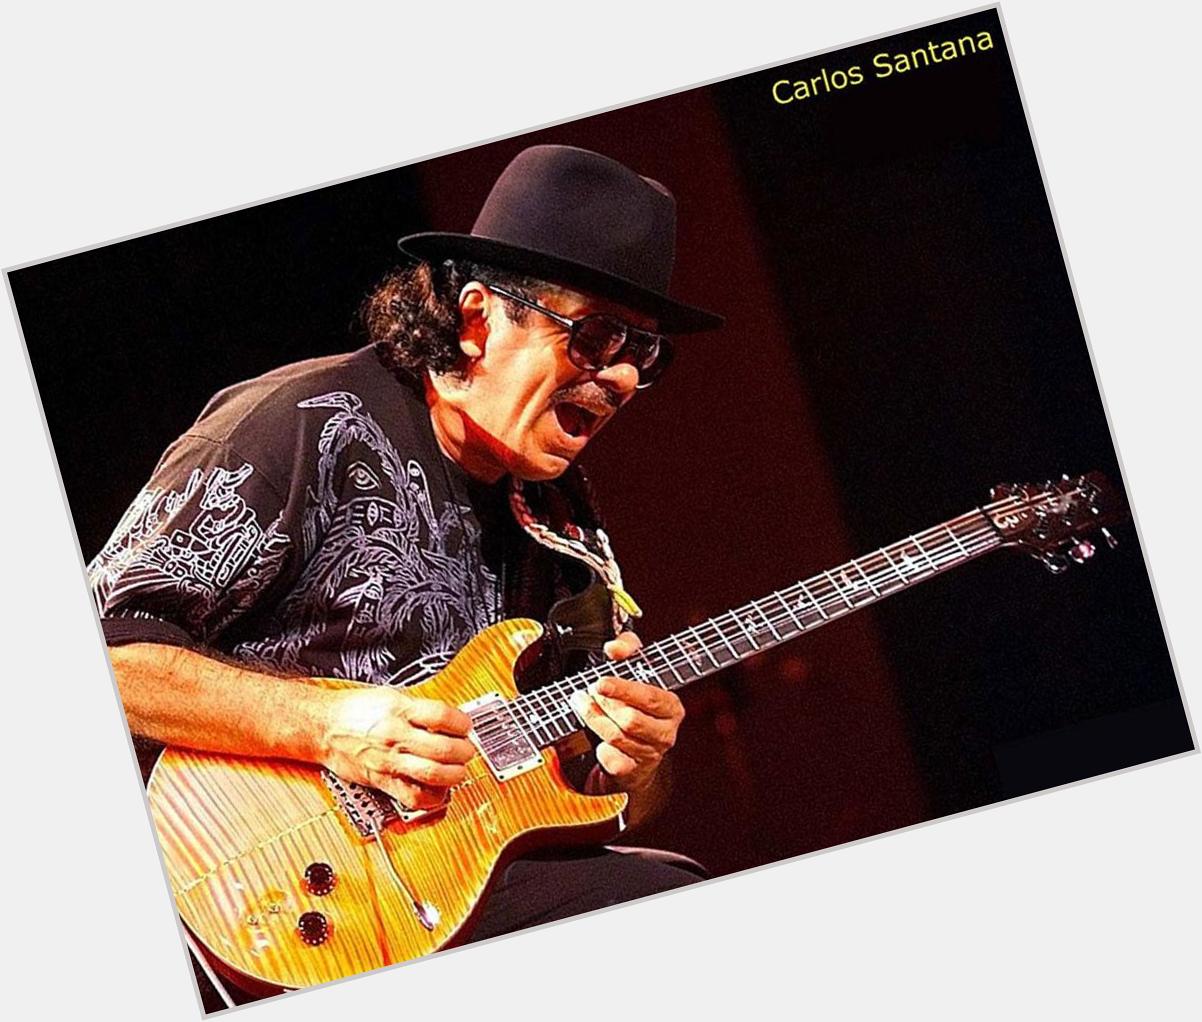 Happy Birthday to Carlos Santana.  Your music is embedded in our hearts & souls. # 